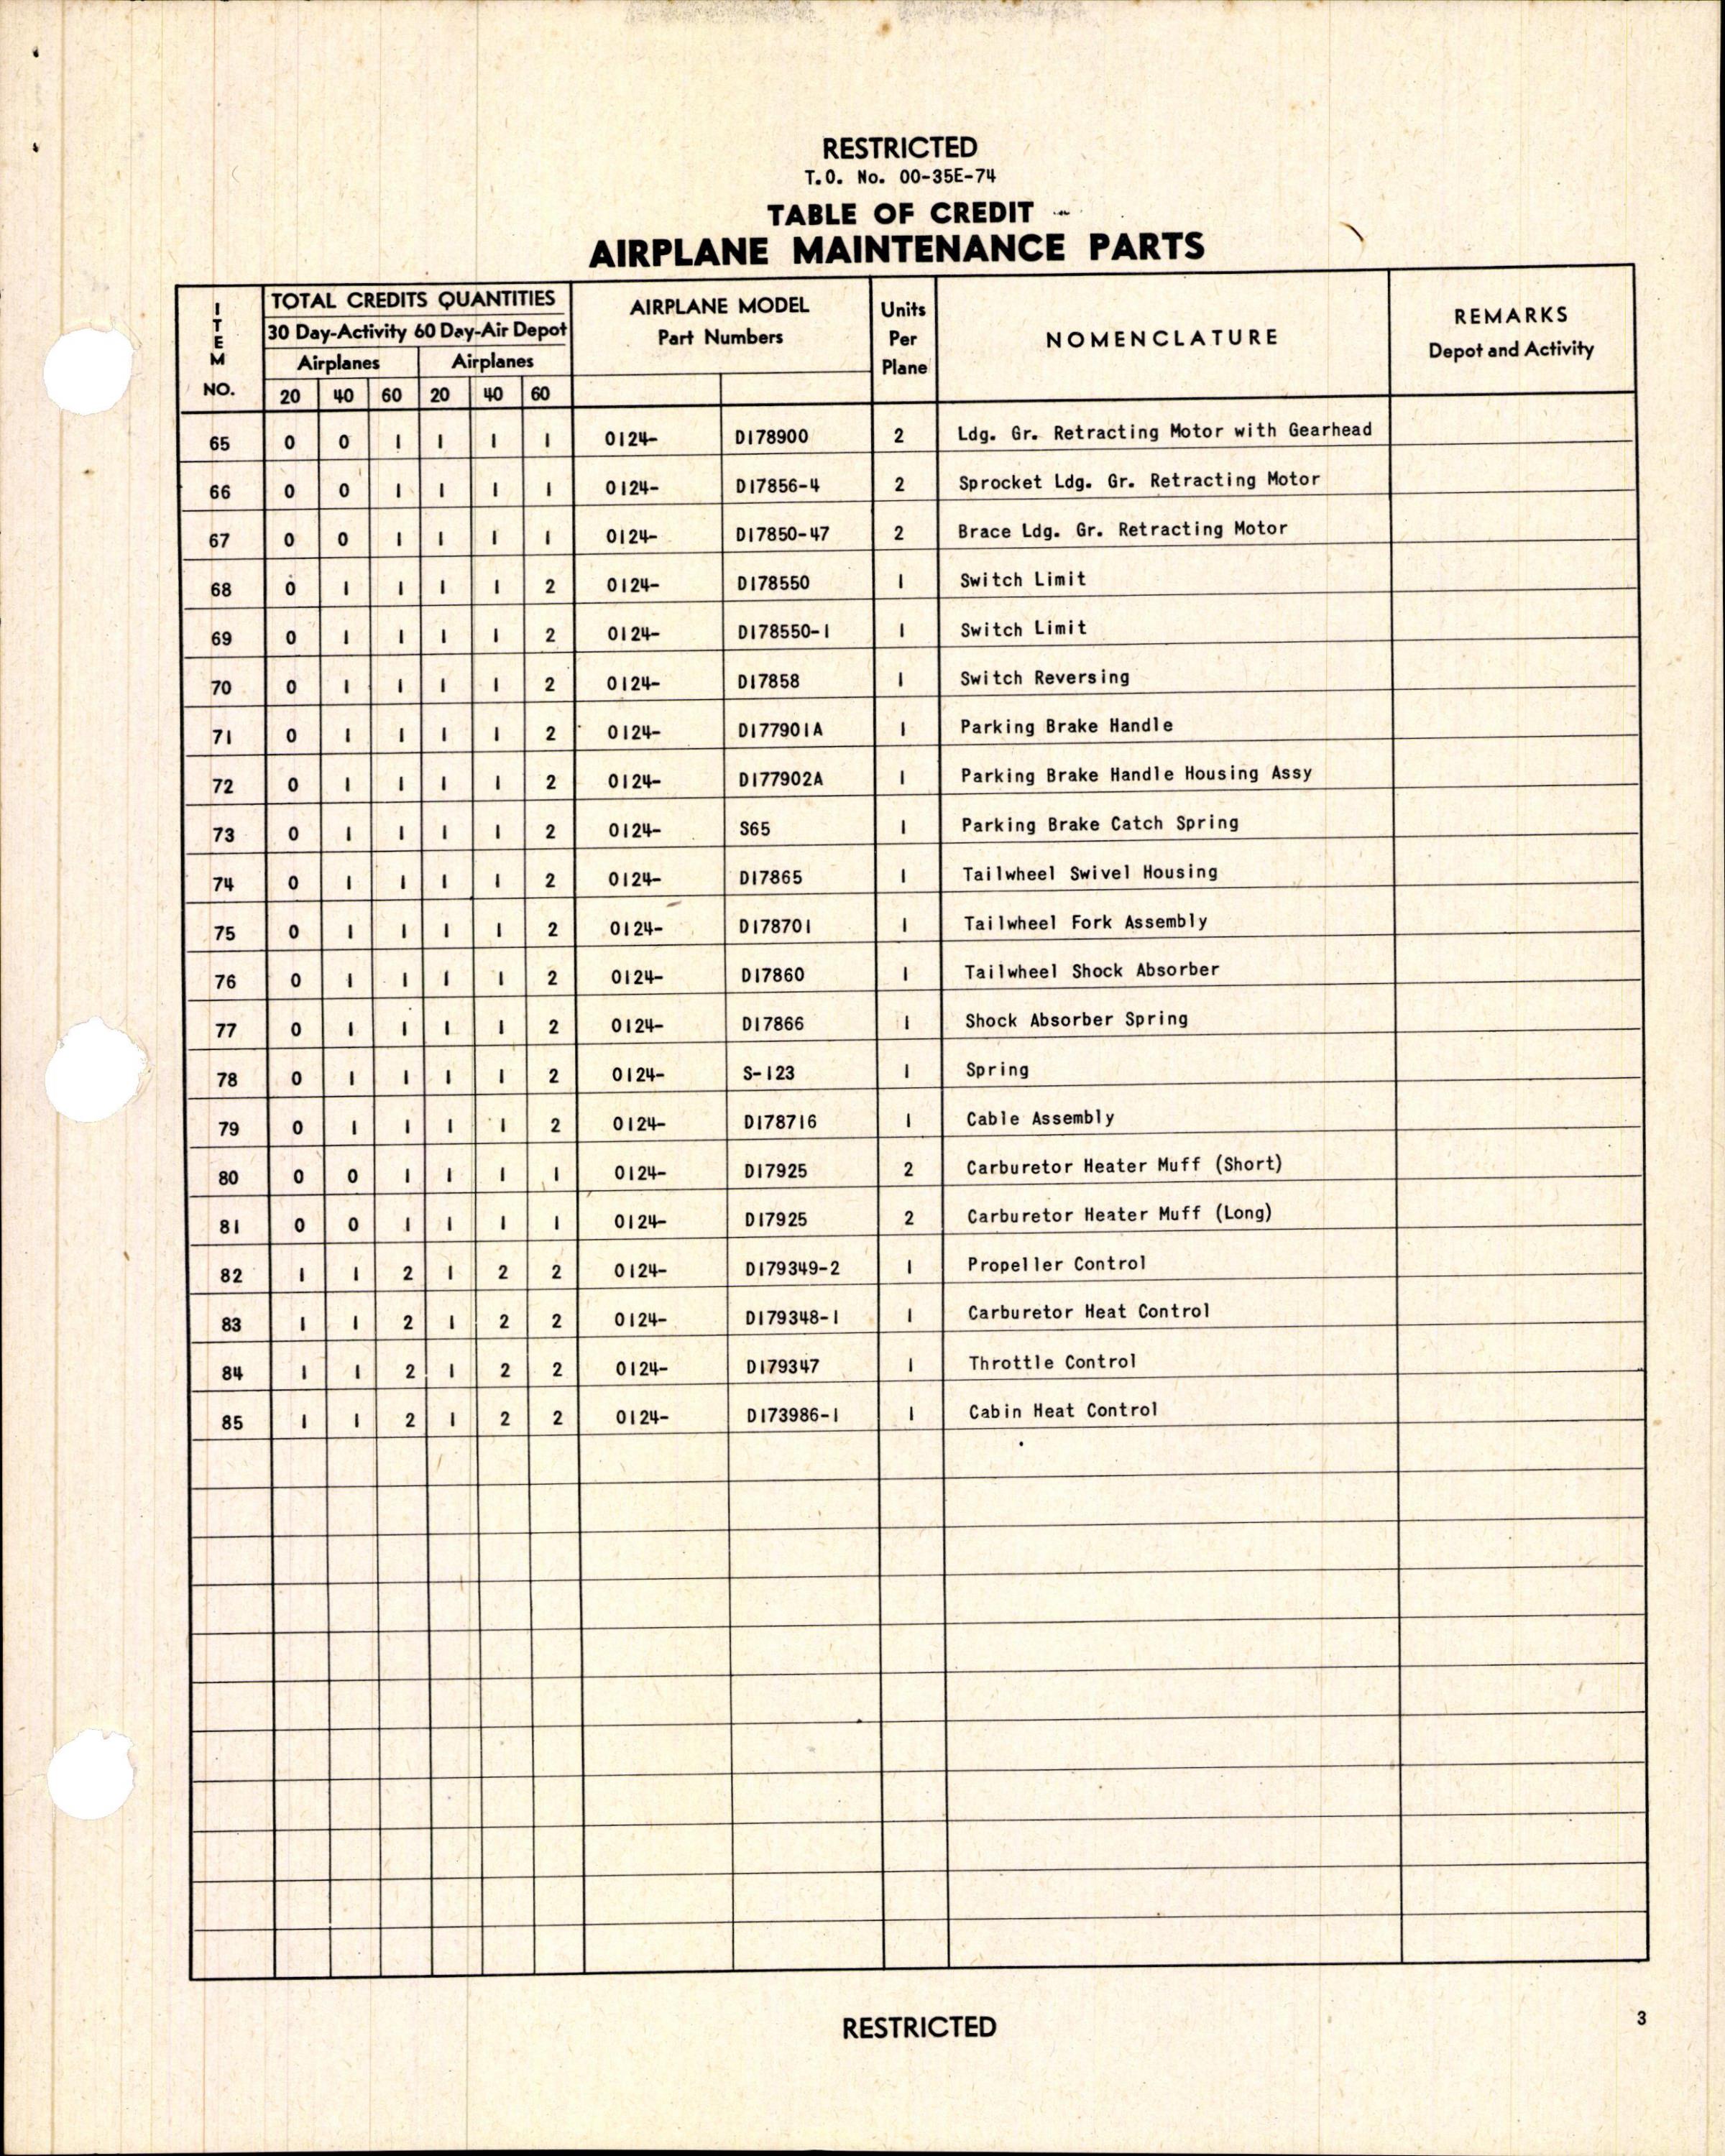 Sample page 5 from AirCorps Library document: Table of Credit - Airplane Maintenance Parts - for UC-43 Airplanes